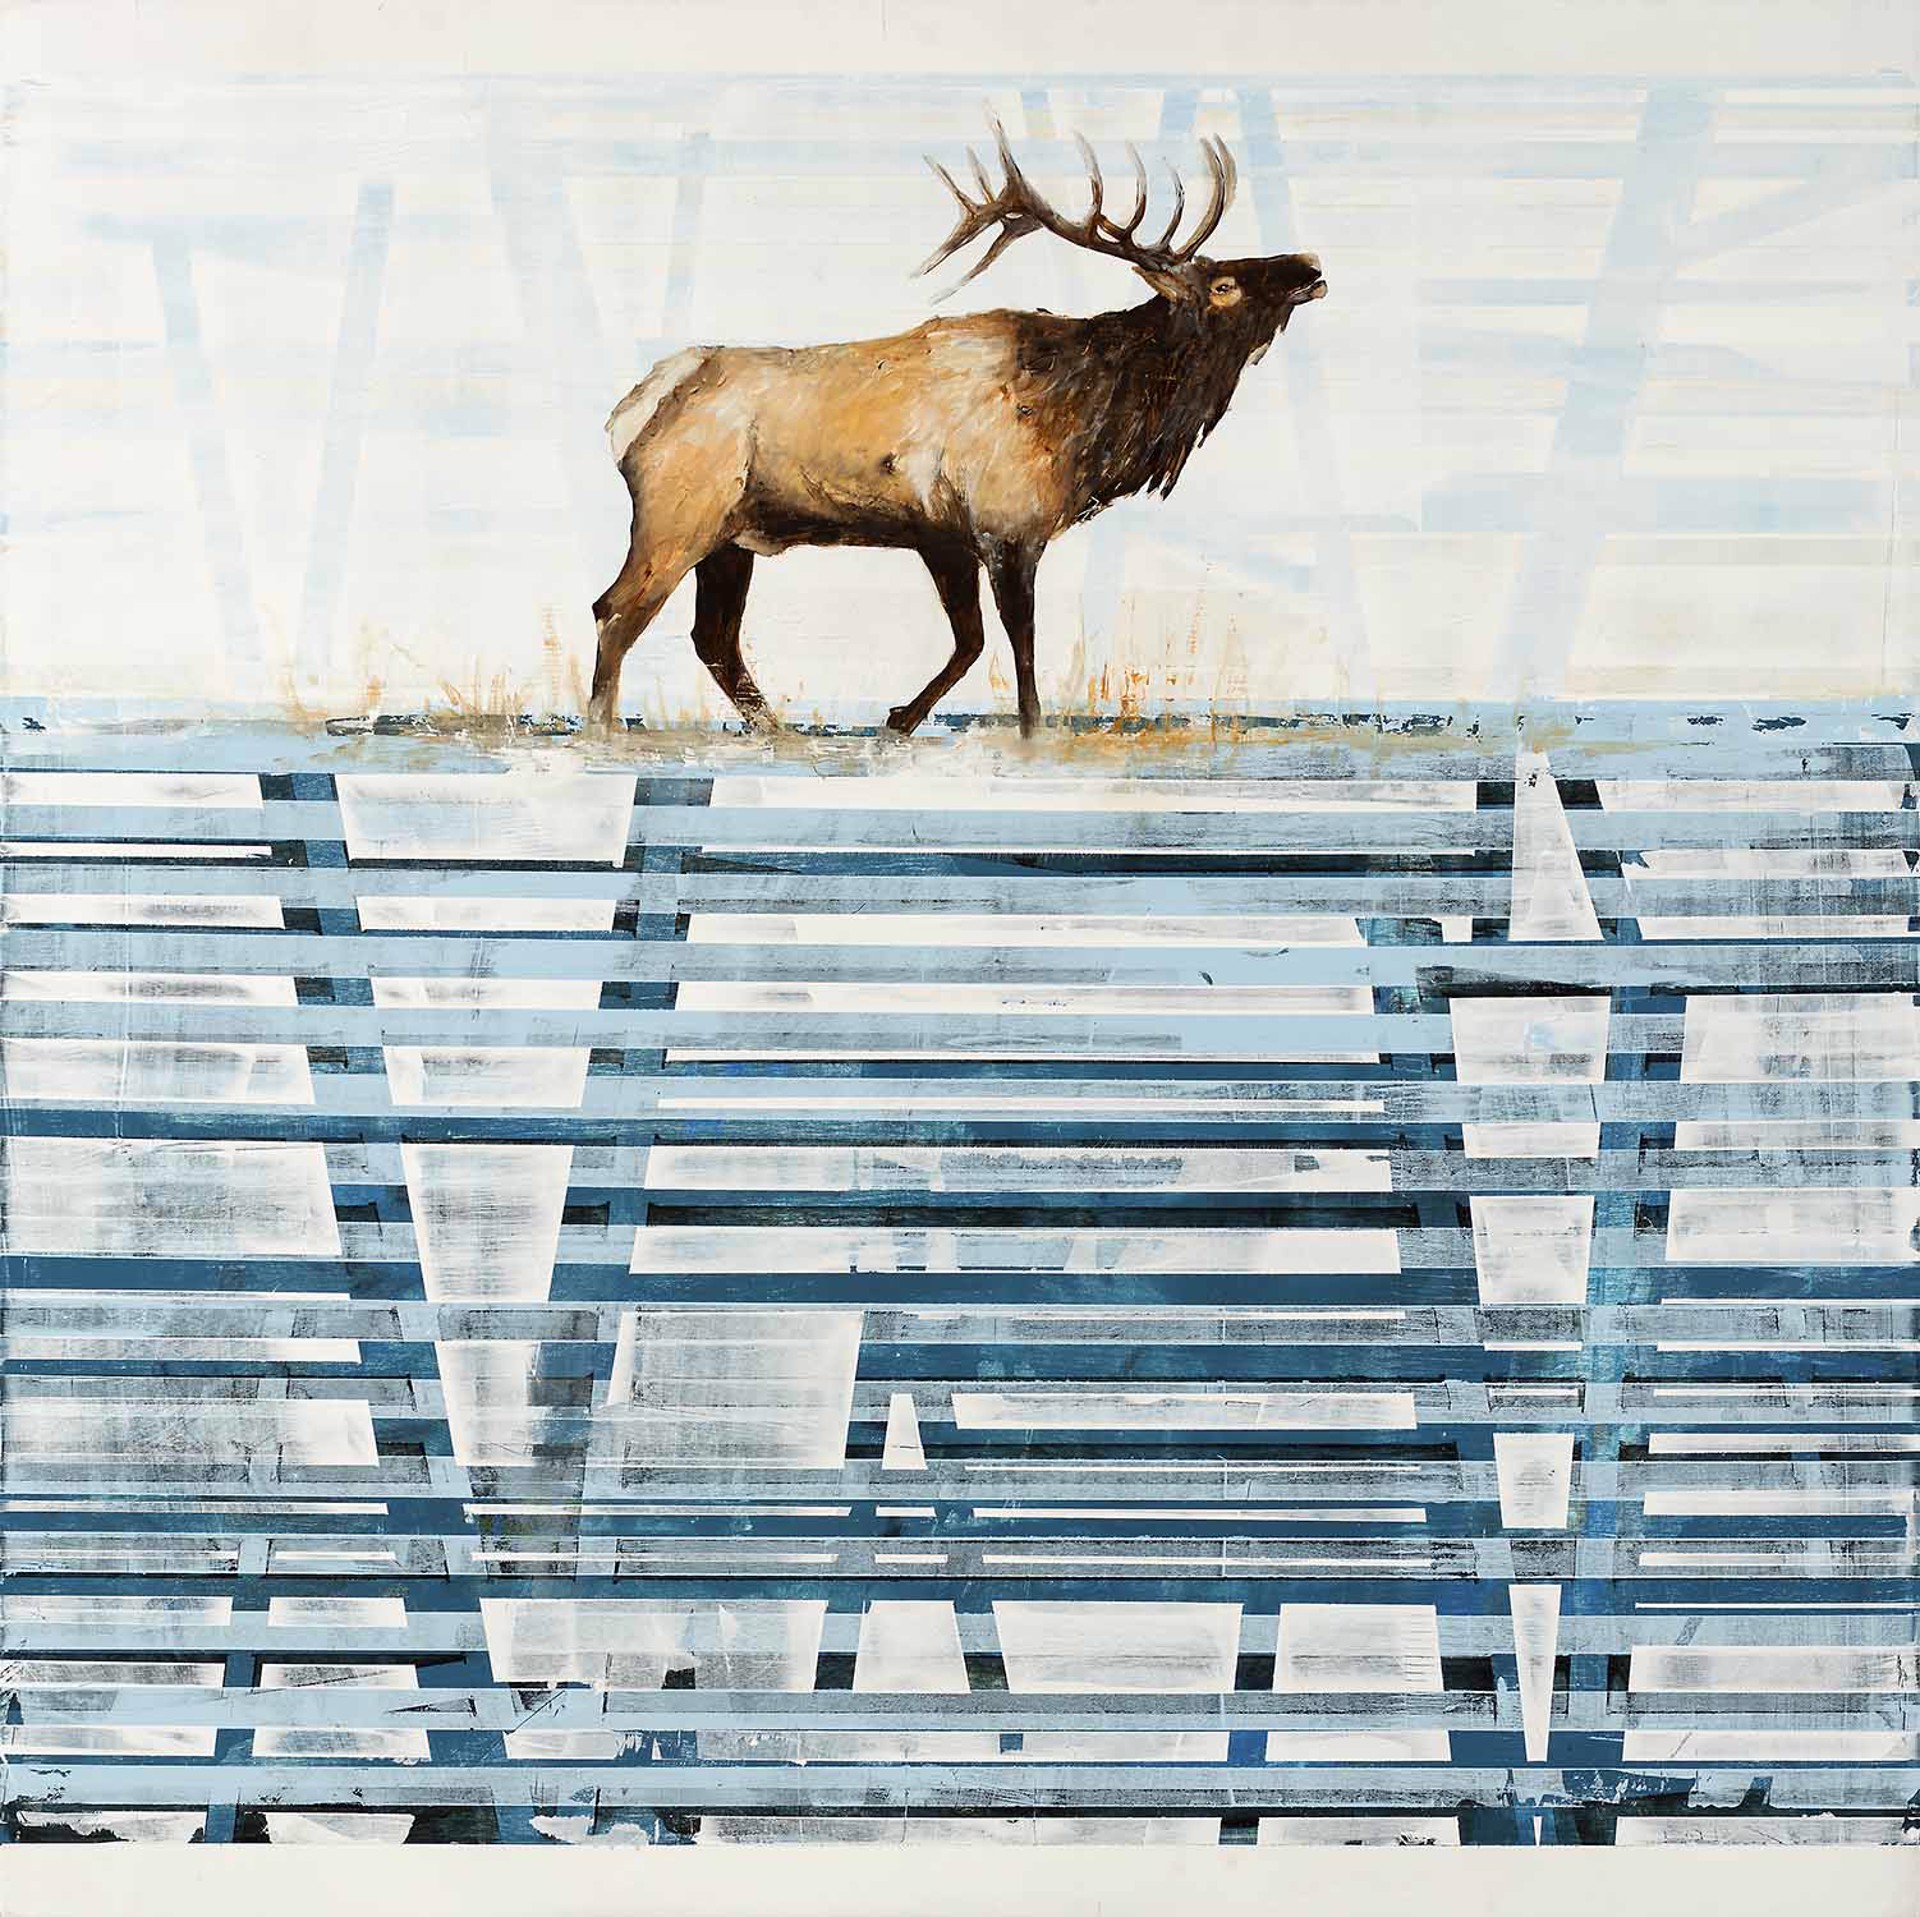 Original Oil Painting Of A Bull Elk Walking On An Abstract Ground Made Of Blue Lines With A Patterned White And Blue Background, Fine Art By Jenna Von Benedikt